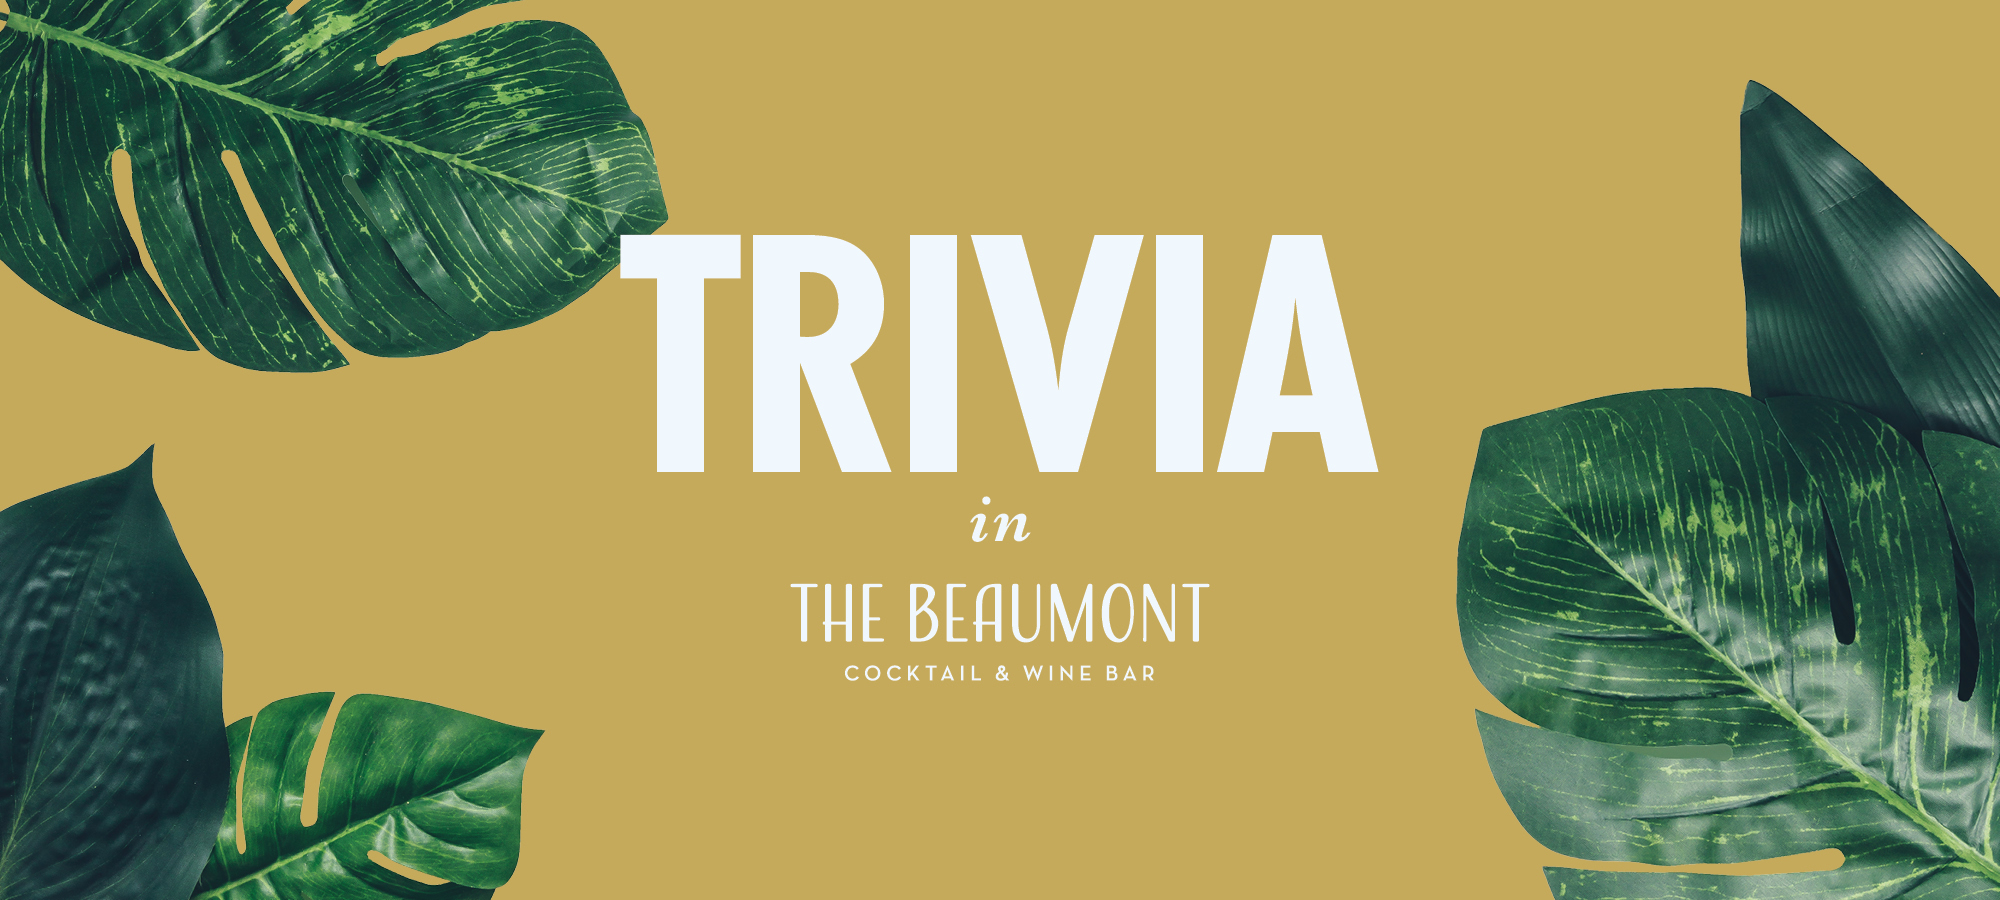 Trivia in The Beaumont – Rom Com Trivia